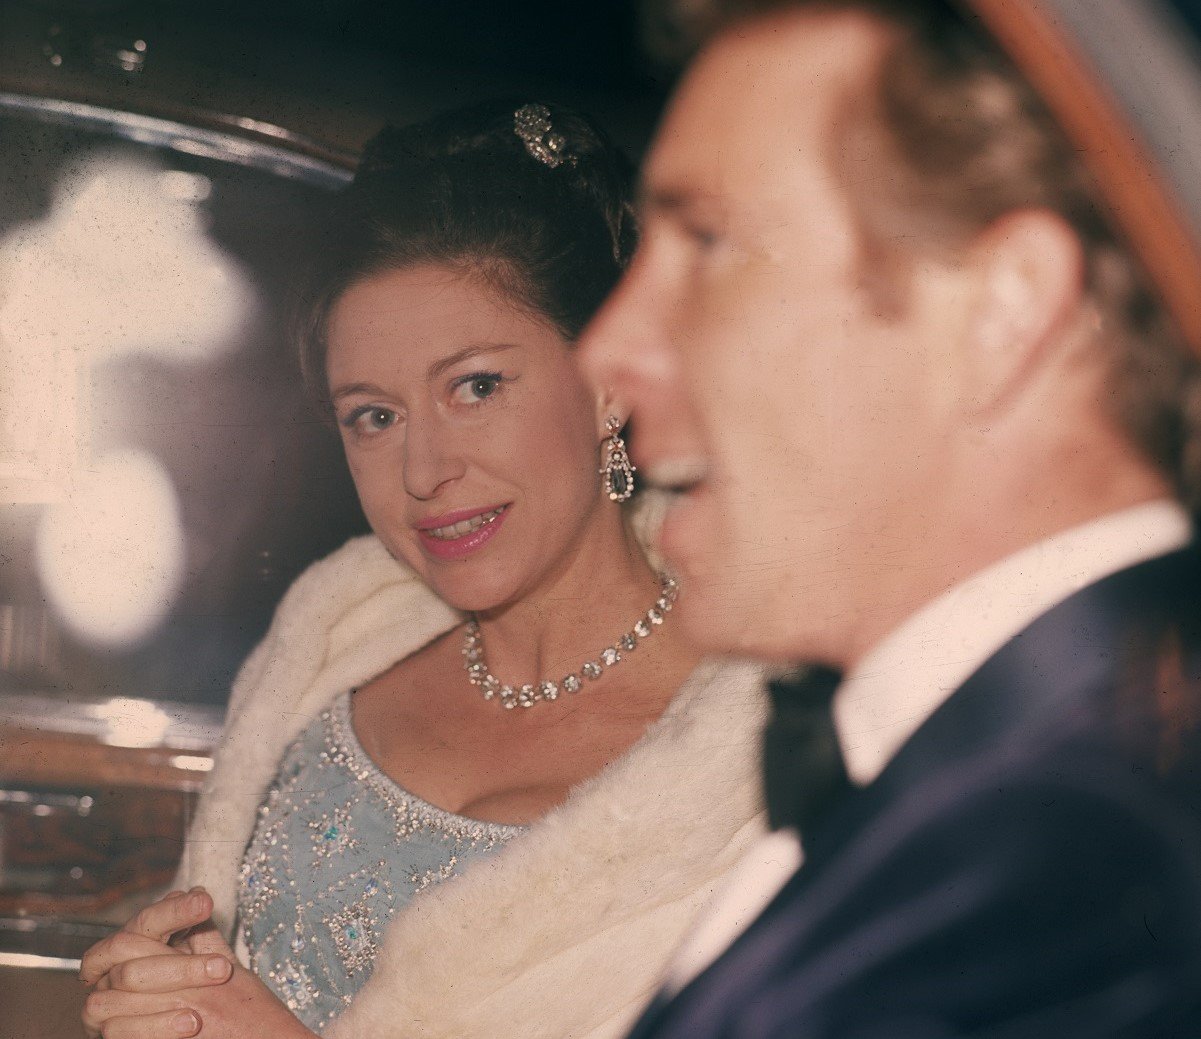 Princess Margaret’s Best Friend Reveals What Queen Elizabeth Really Thought of Her Sister’s Extramarital Affair